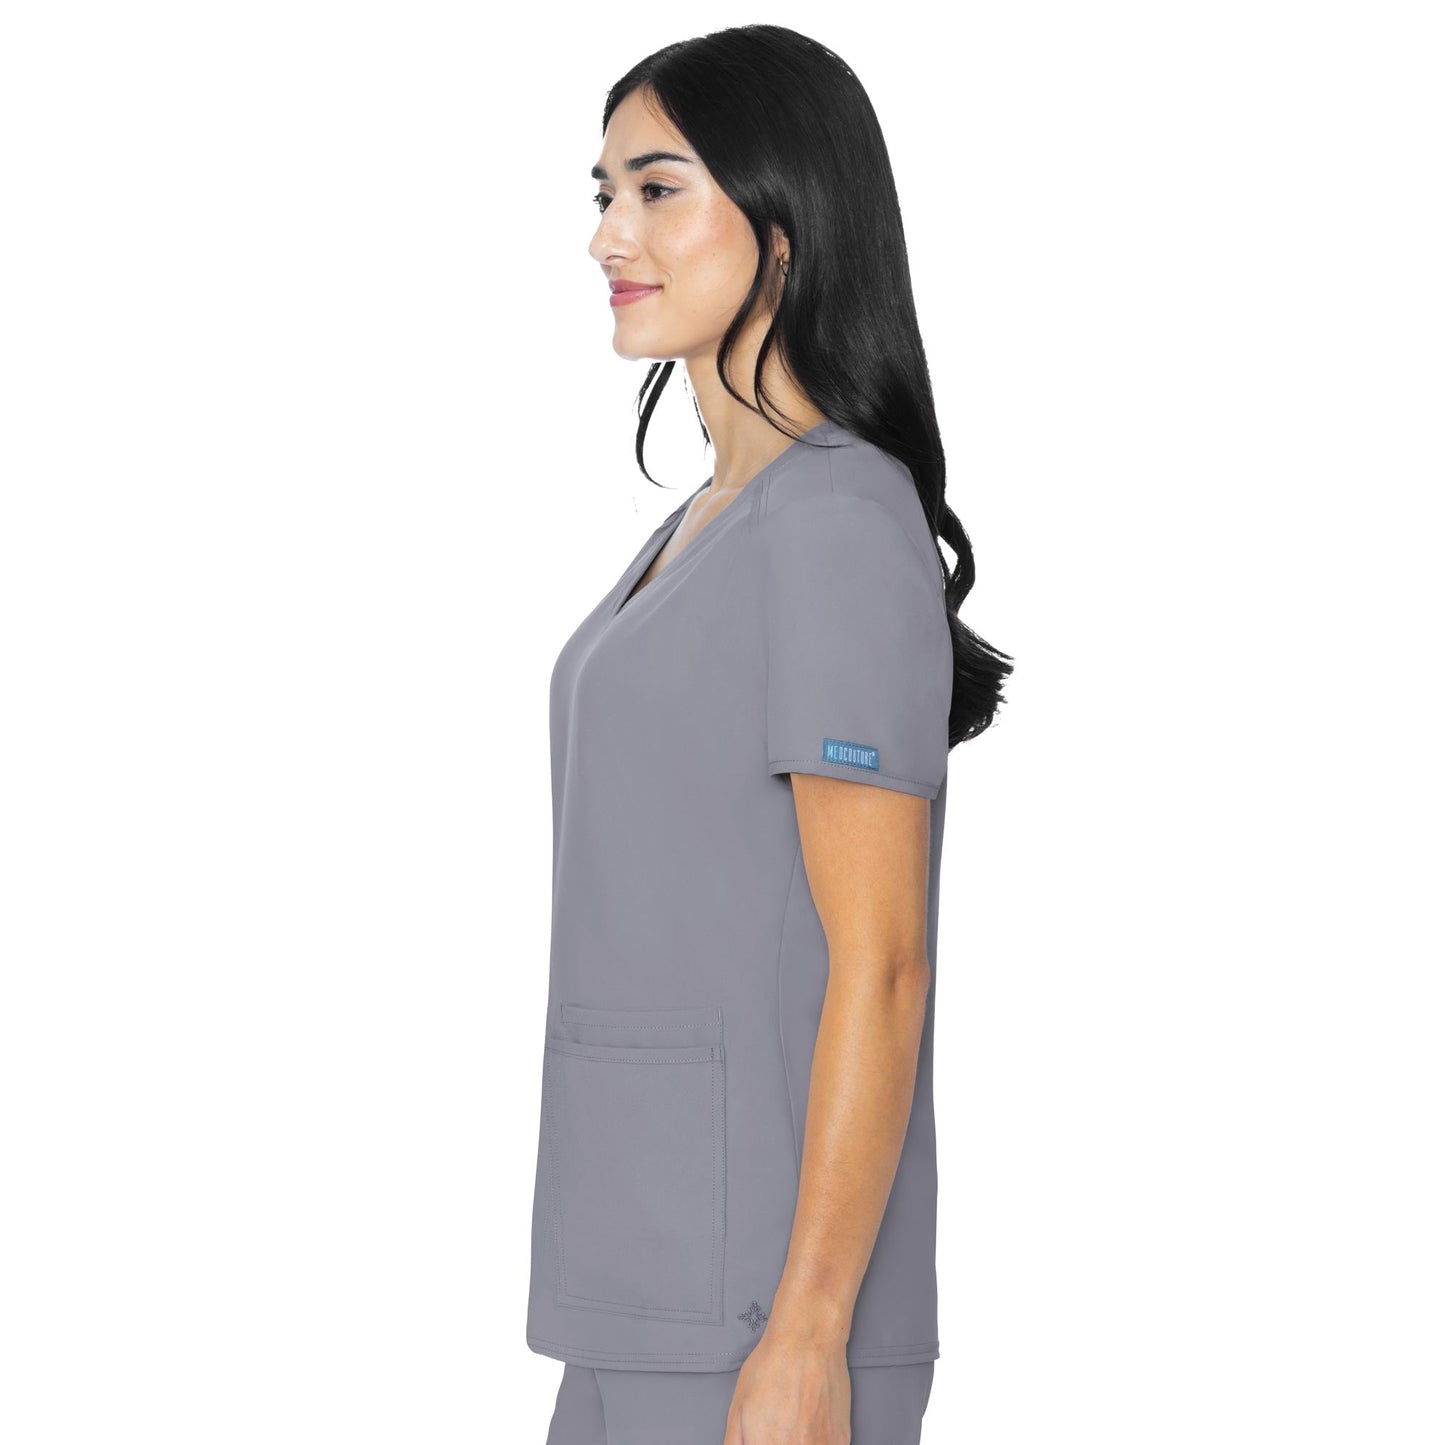 Med Couture Insight 3 Pocket Top Extended Sizes (2XL-5XL)